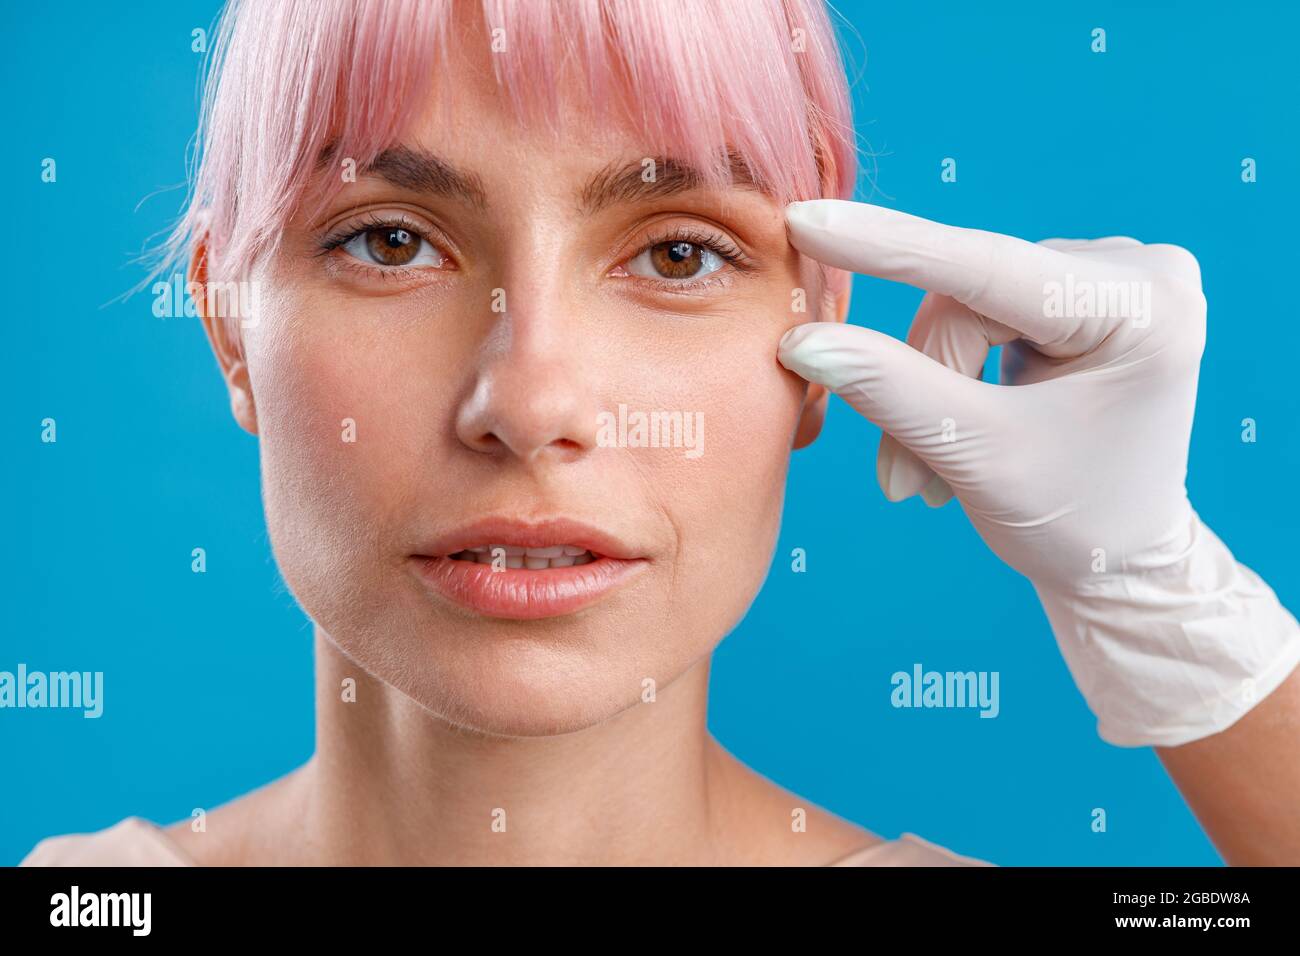 Hand of beautician touching female face, examining it before giving botox injection Stock Photo